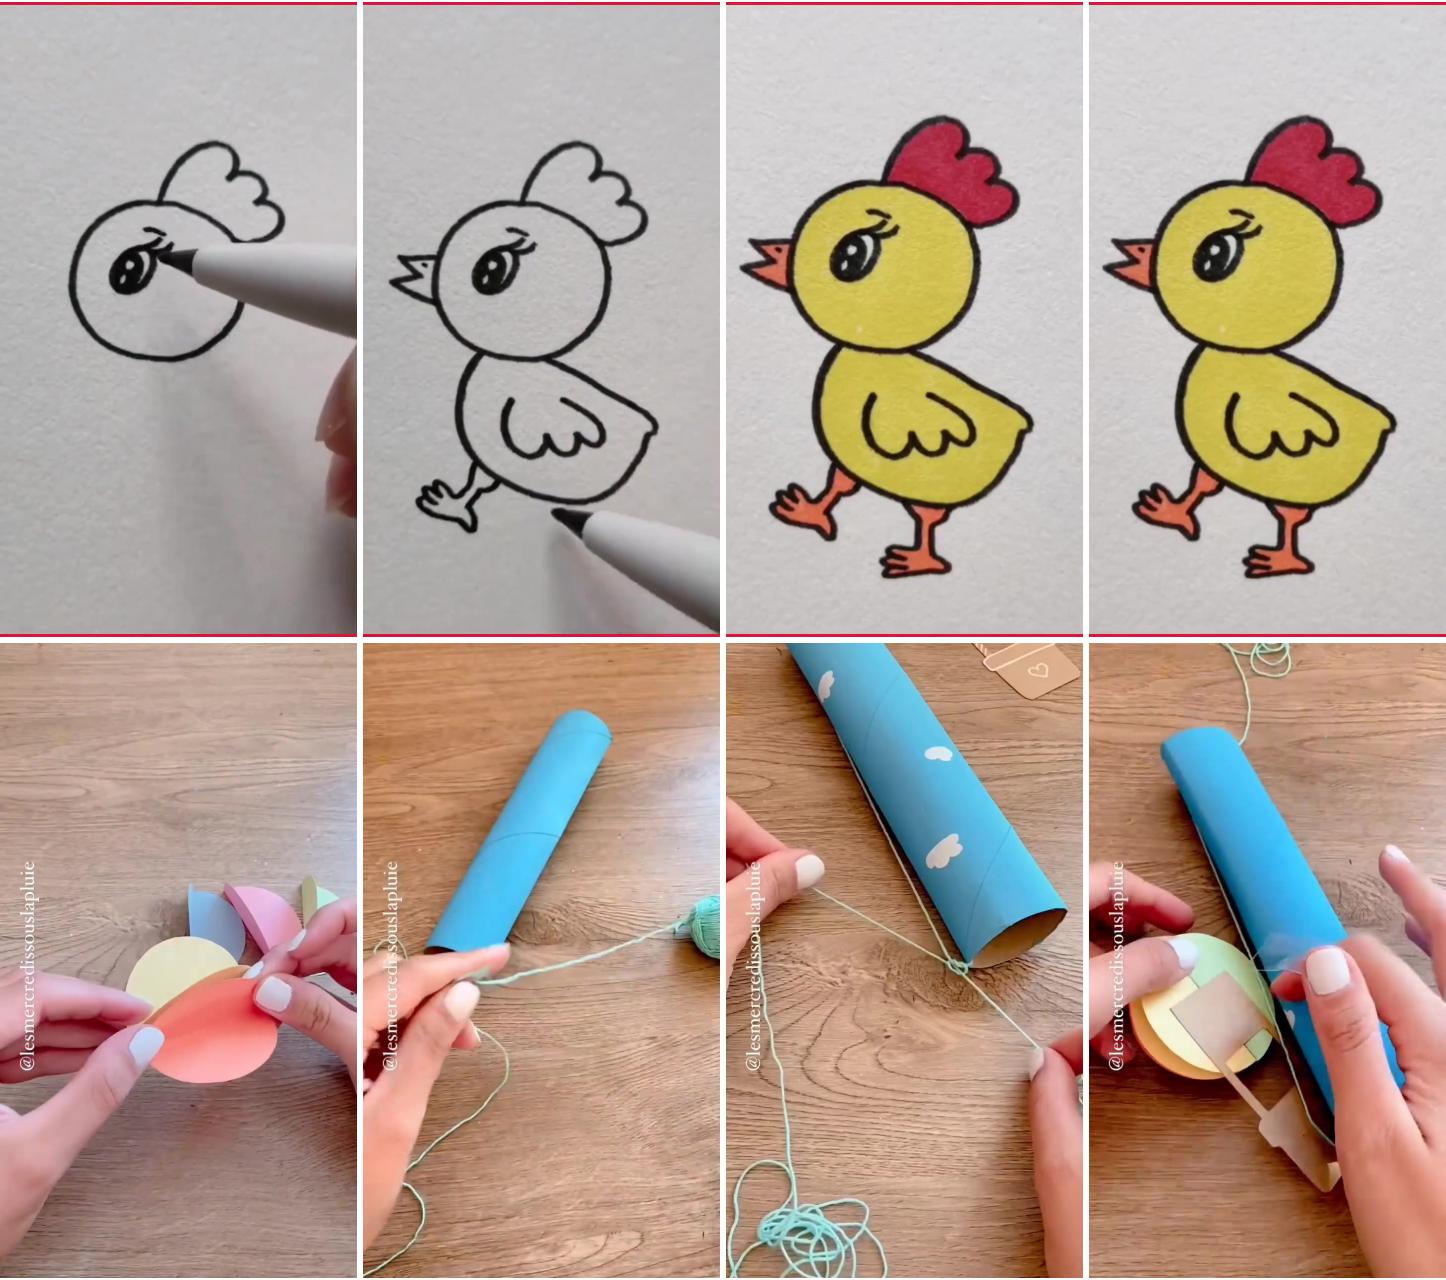 How to draw a chickens - easy step by step guide for kids | drawing images for kids